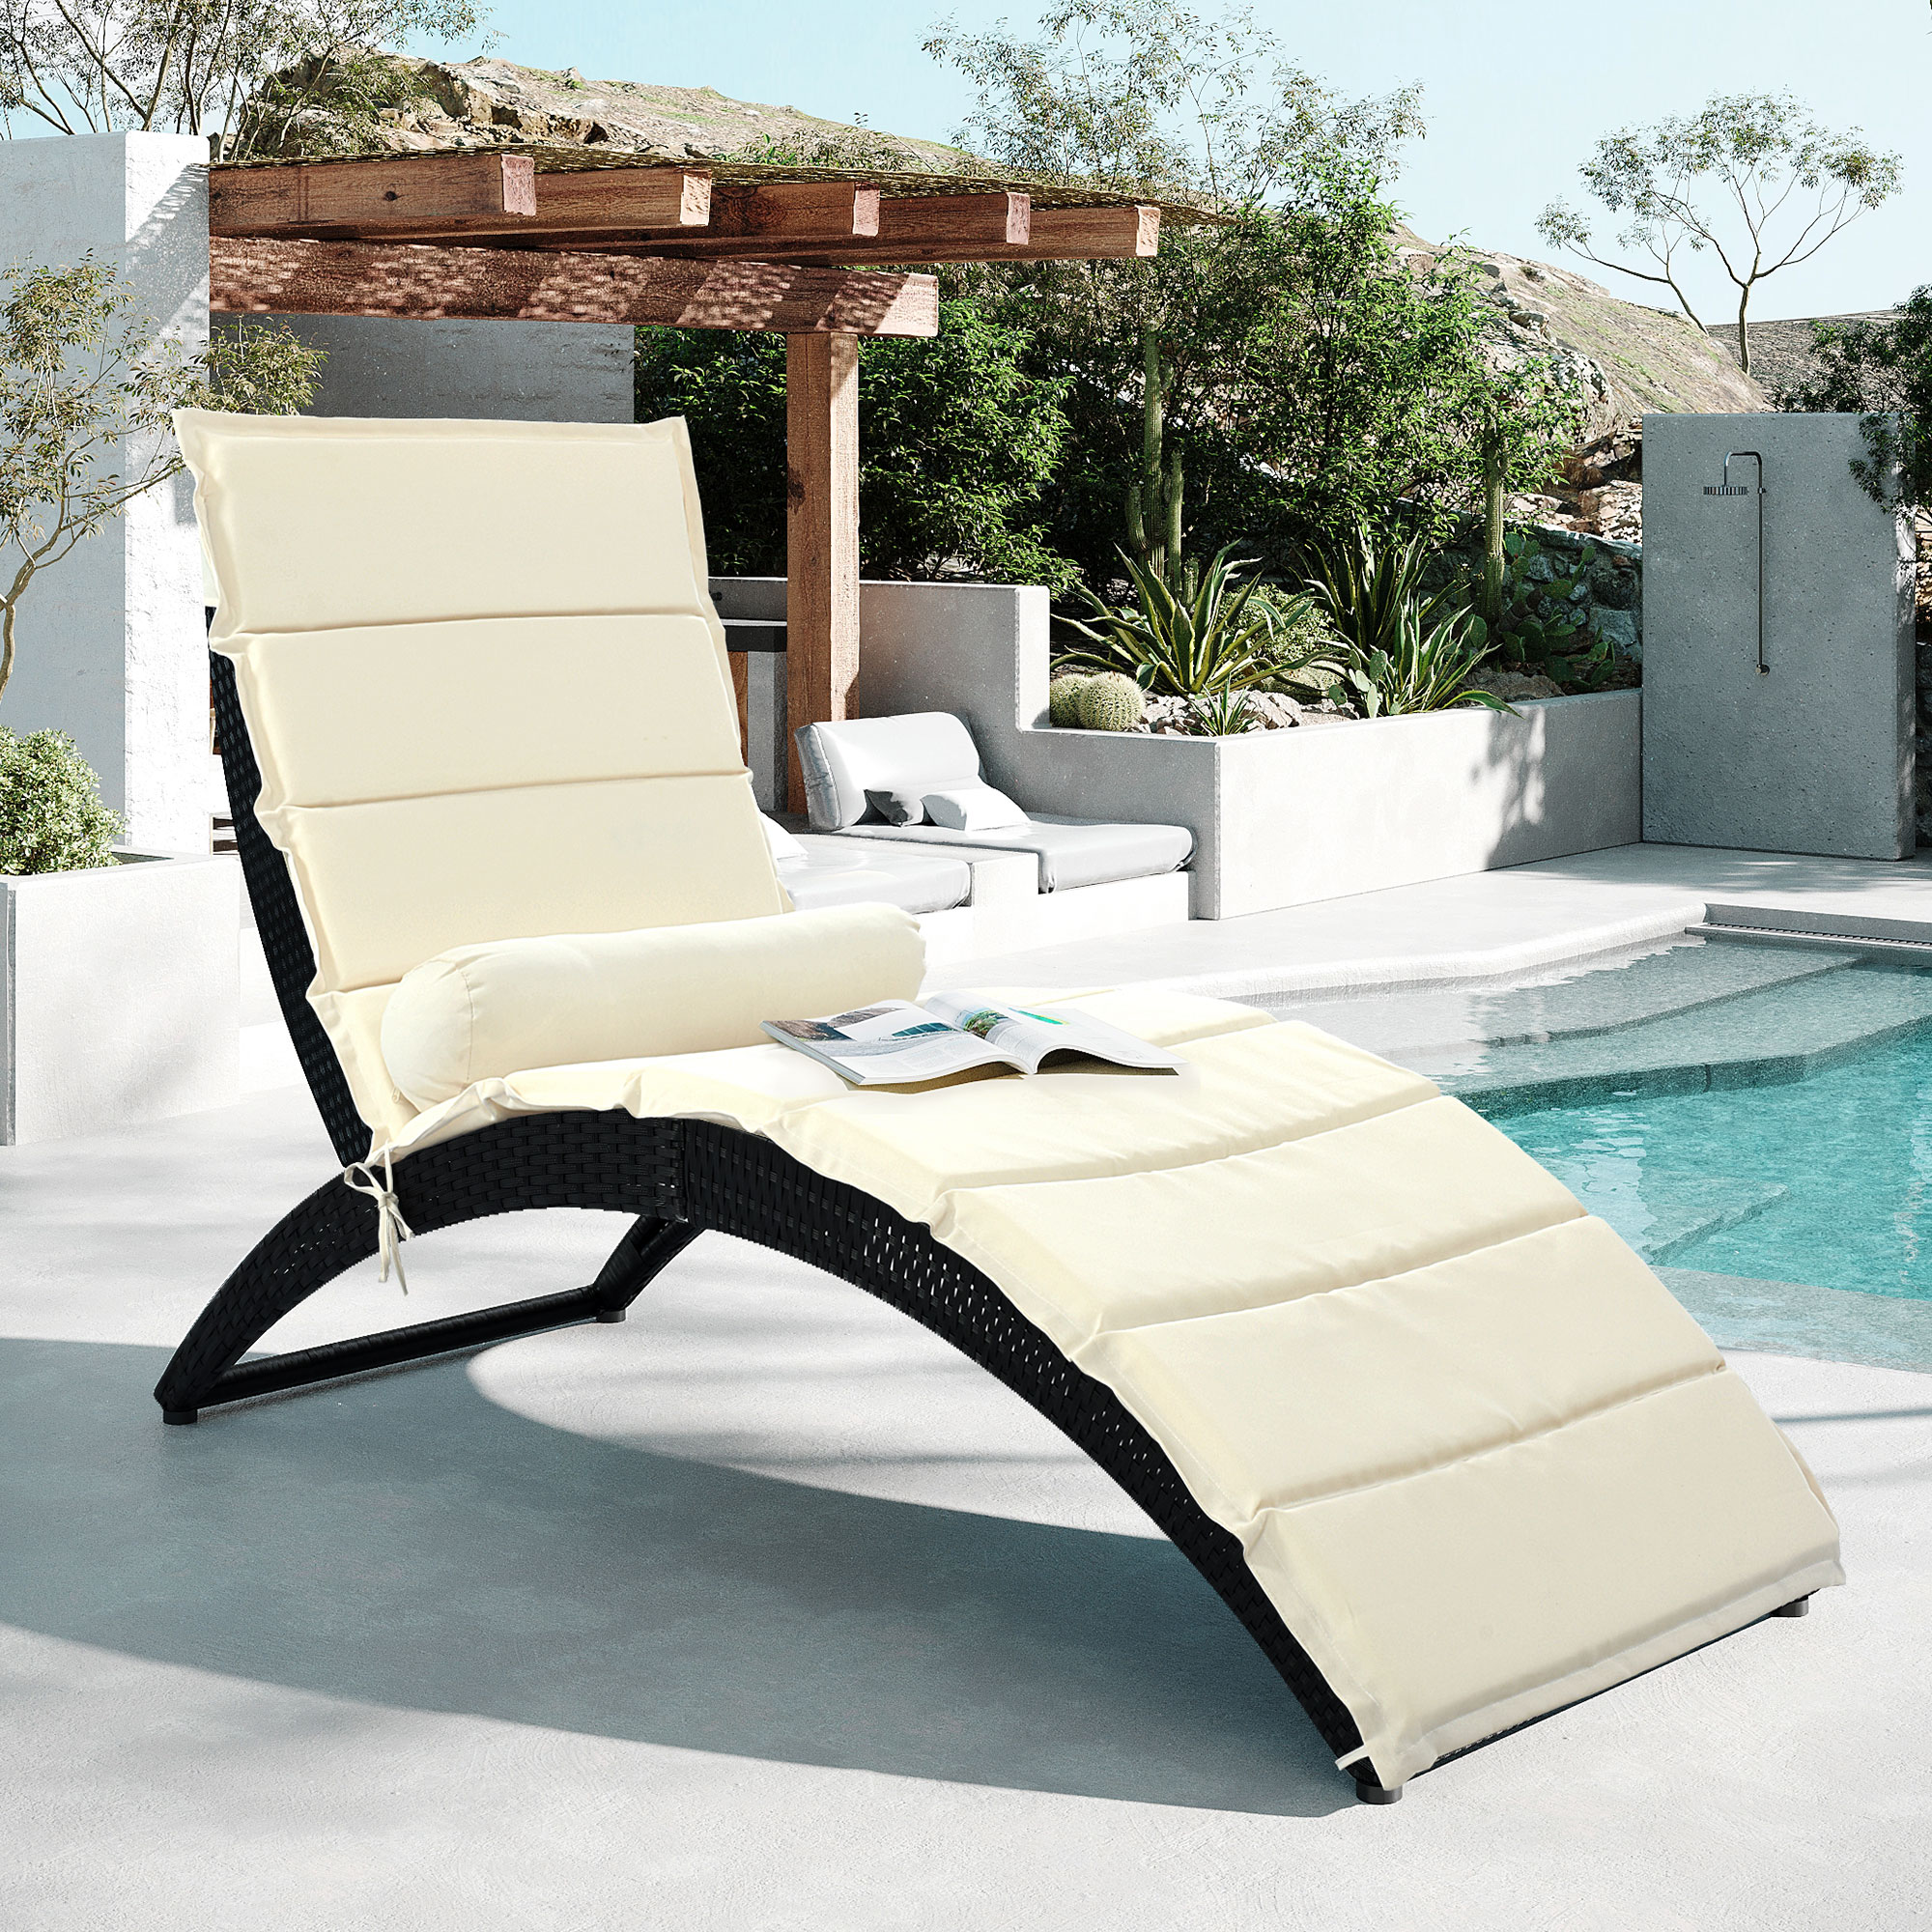 Patio Chaise Lounge, Removeble Reclining Camping Chair, PE Rattan Foldable Sun Recliner Chair with Seat Cushion, Poolside Garden Outdoor Chaise Lounge Chairs, JA1102 - image 1 of 8